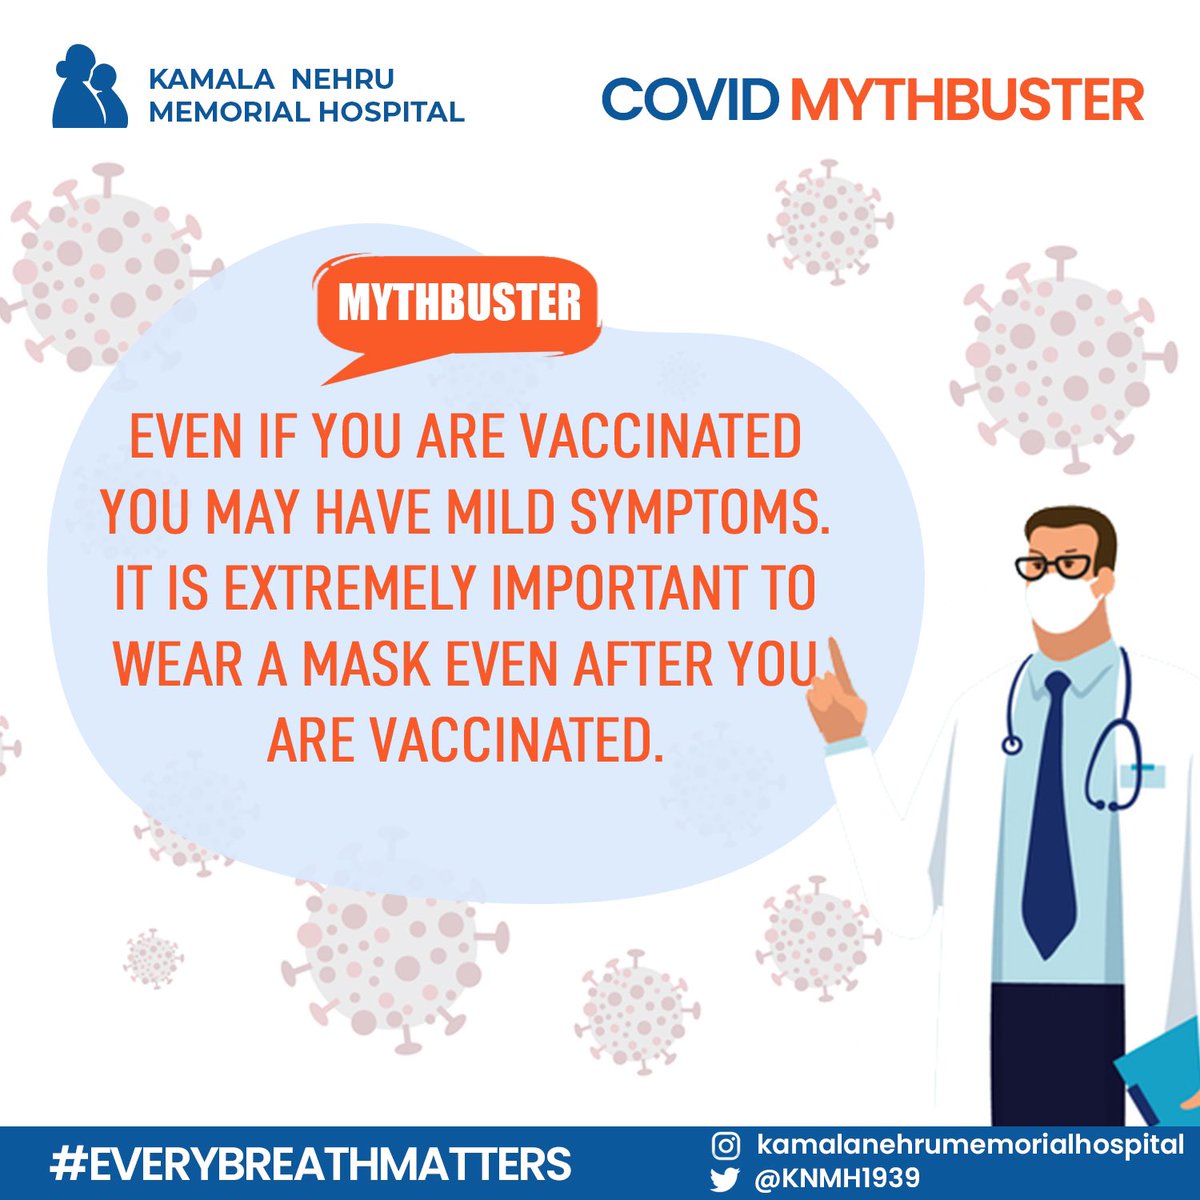 Wearing a mask is one of the most effective ways to stop the spread of Covid-19.

#EveryBreathMatters

#kamalanehrumemorialhospital 
#IndiafightsCovid #Covid19India #Covid19IndiaHelp  #CovidEmergencyIndia  #CovidResources #Covidfacility #CovidHospital #TeamKNMH #KNMHCommunity